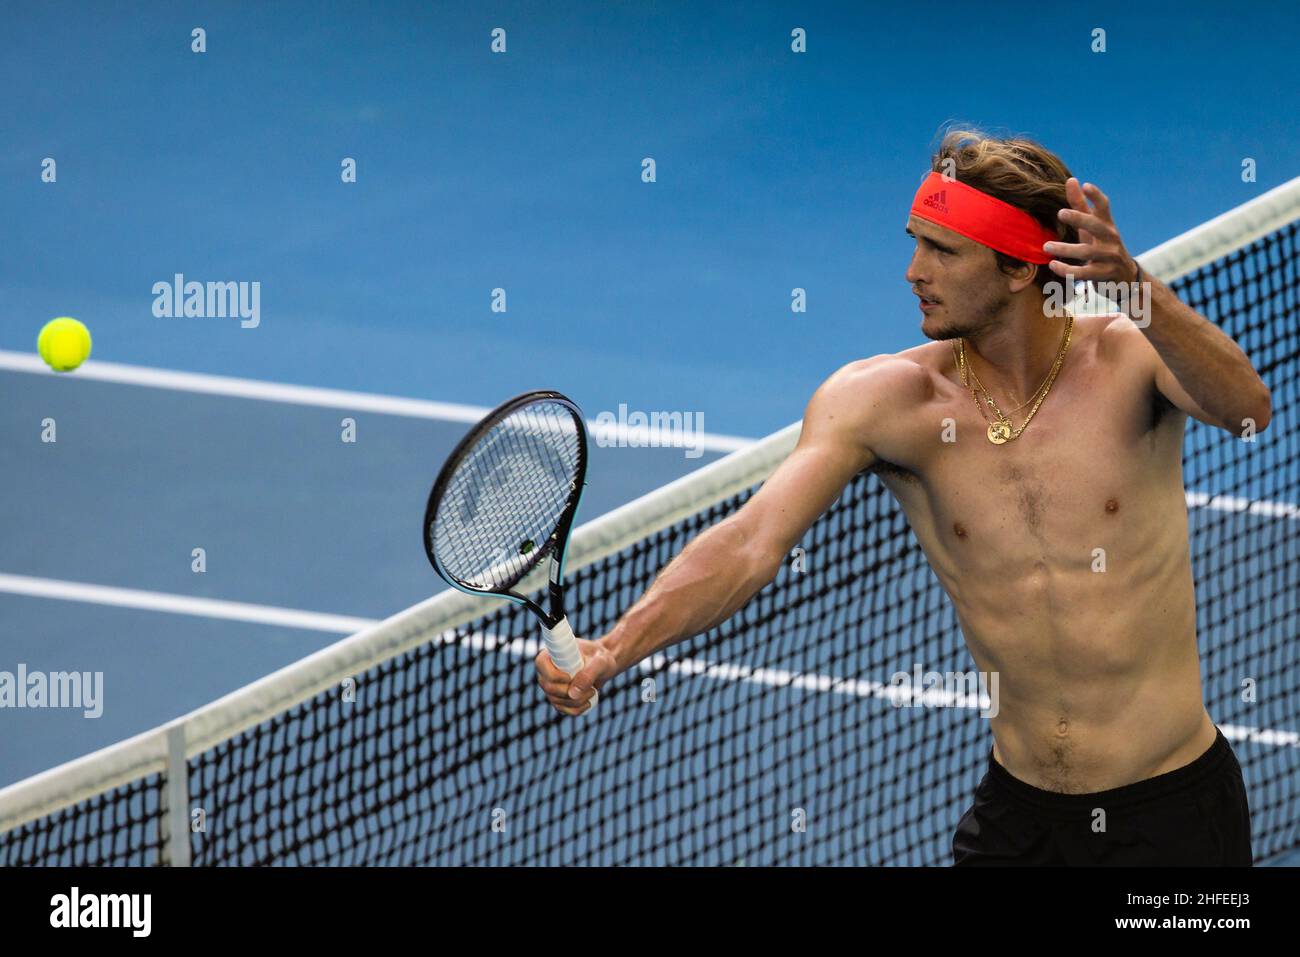 Melbourne, Australia. 16th Jan, 2022. Tennis: WTA Tour/ATP Tour -  Melbourne: Alexander Zverev of Germany is in action during a practice  session ahead of the Australian Open at Melbourne Park. Credit: Frank